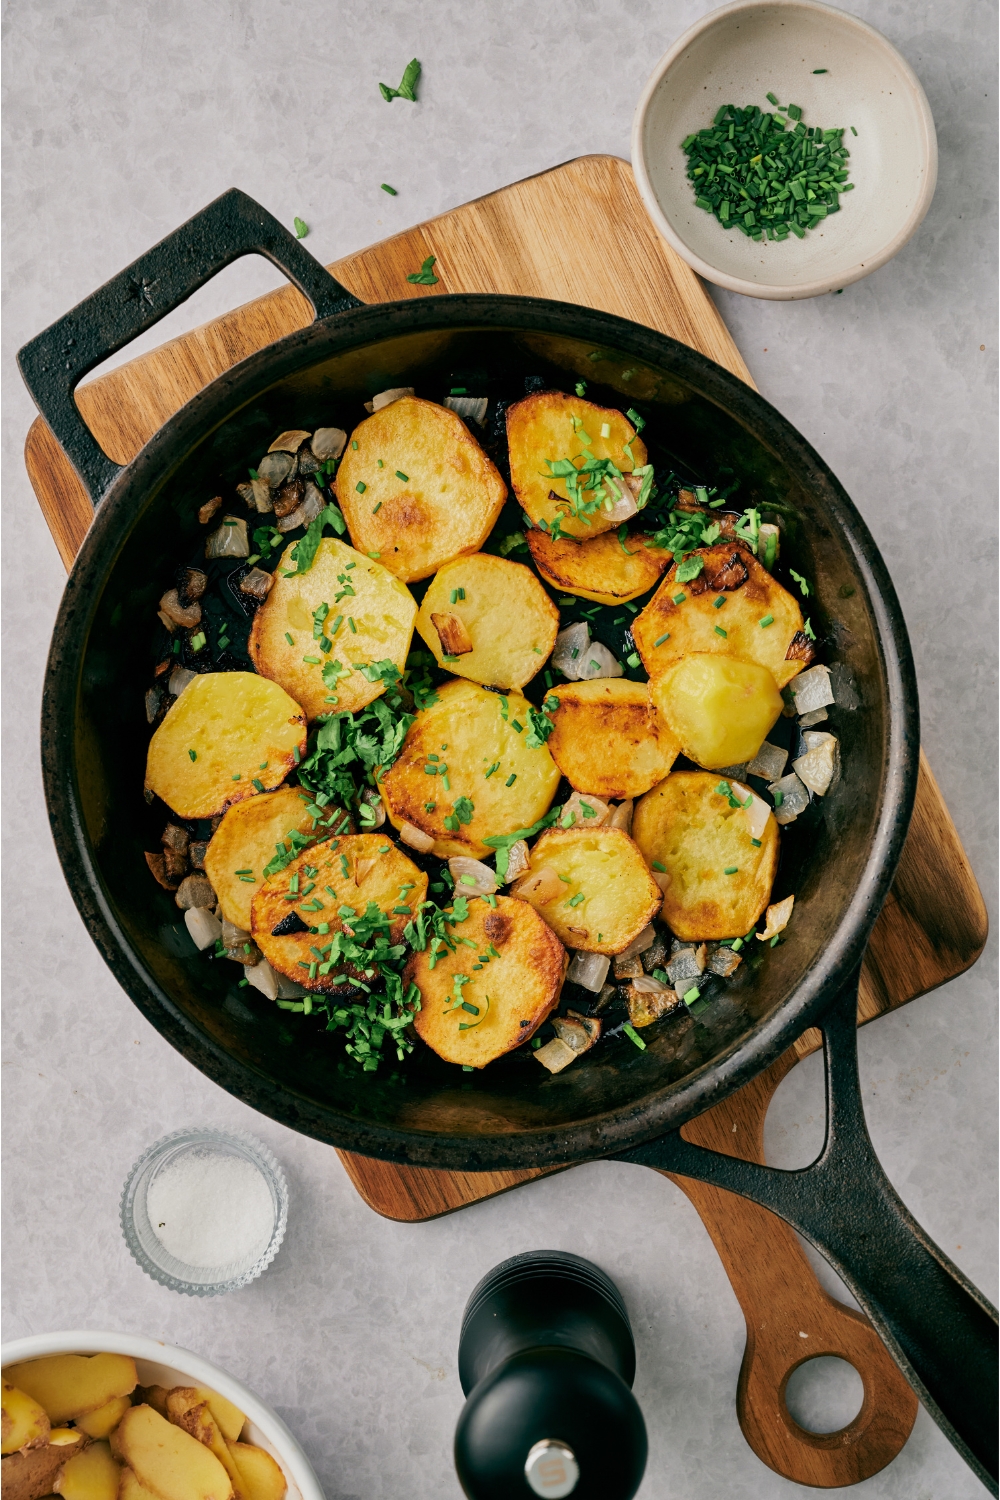 A skillet with pan fried potatoes and onions garnished with fresh green herbs.